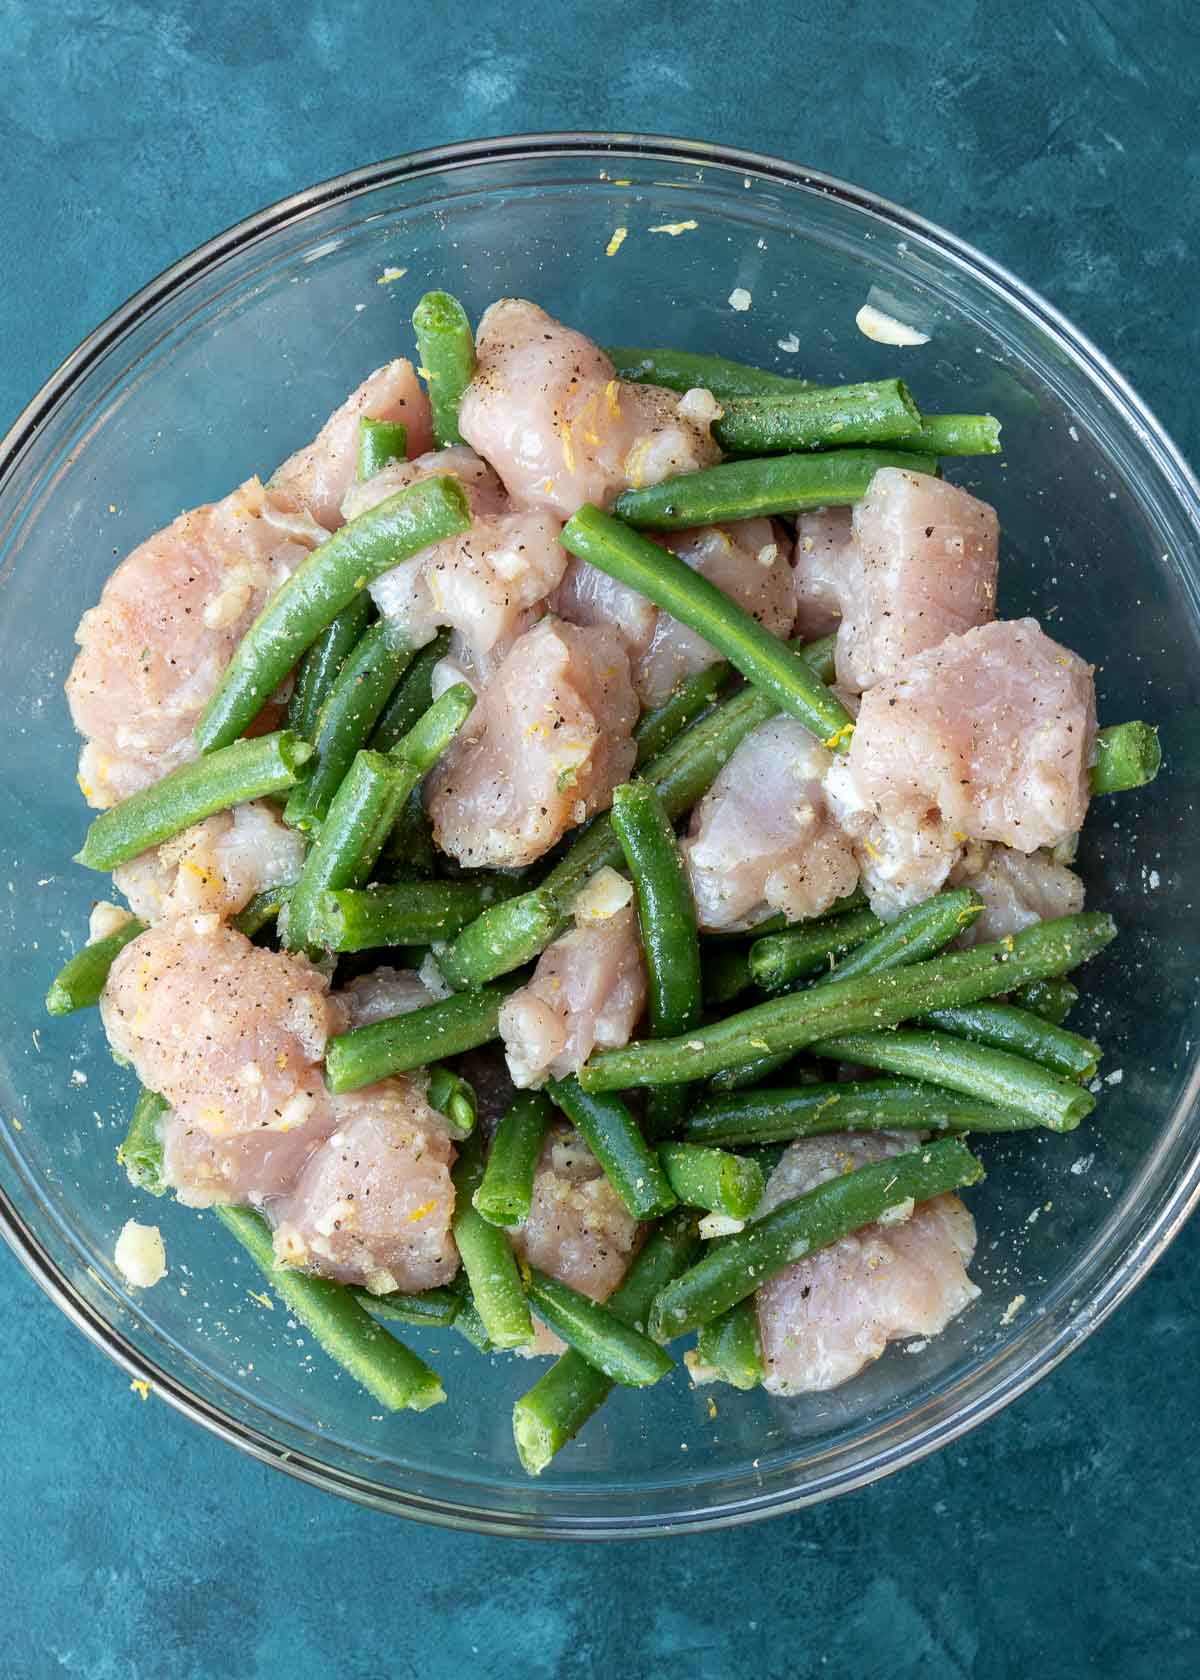 seasoned chicken and green beans in a glass bowl